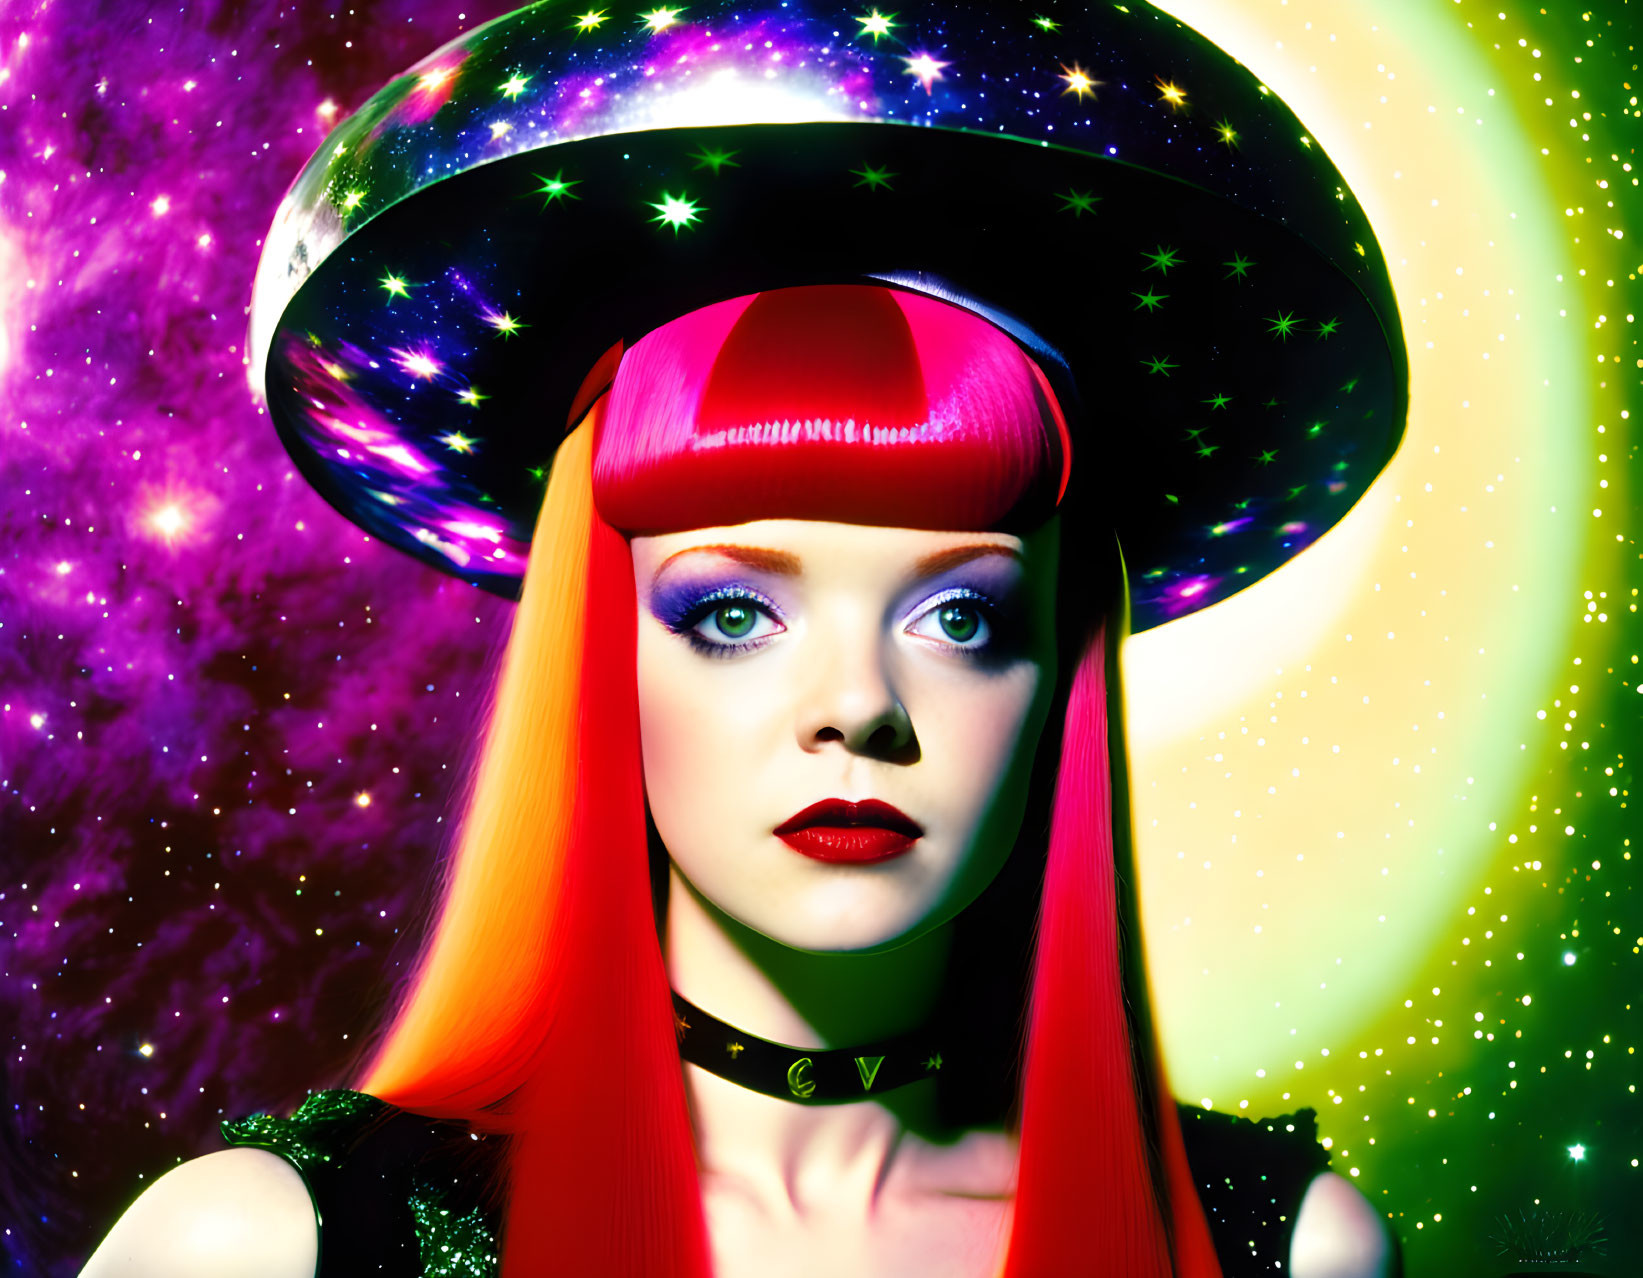 Colorful cosmic background with woman in futuristic hat and pink hair